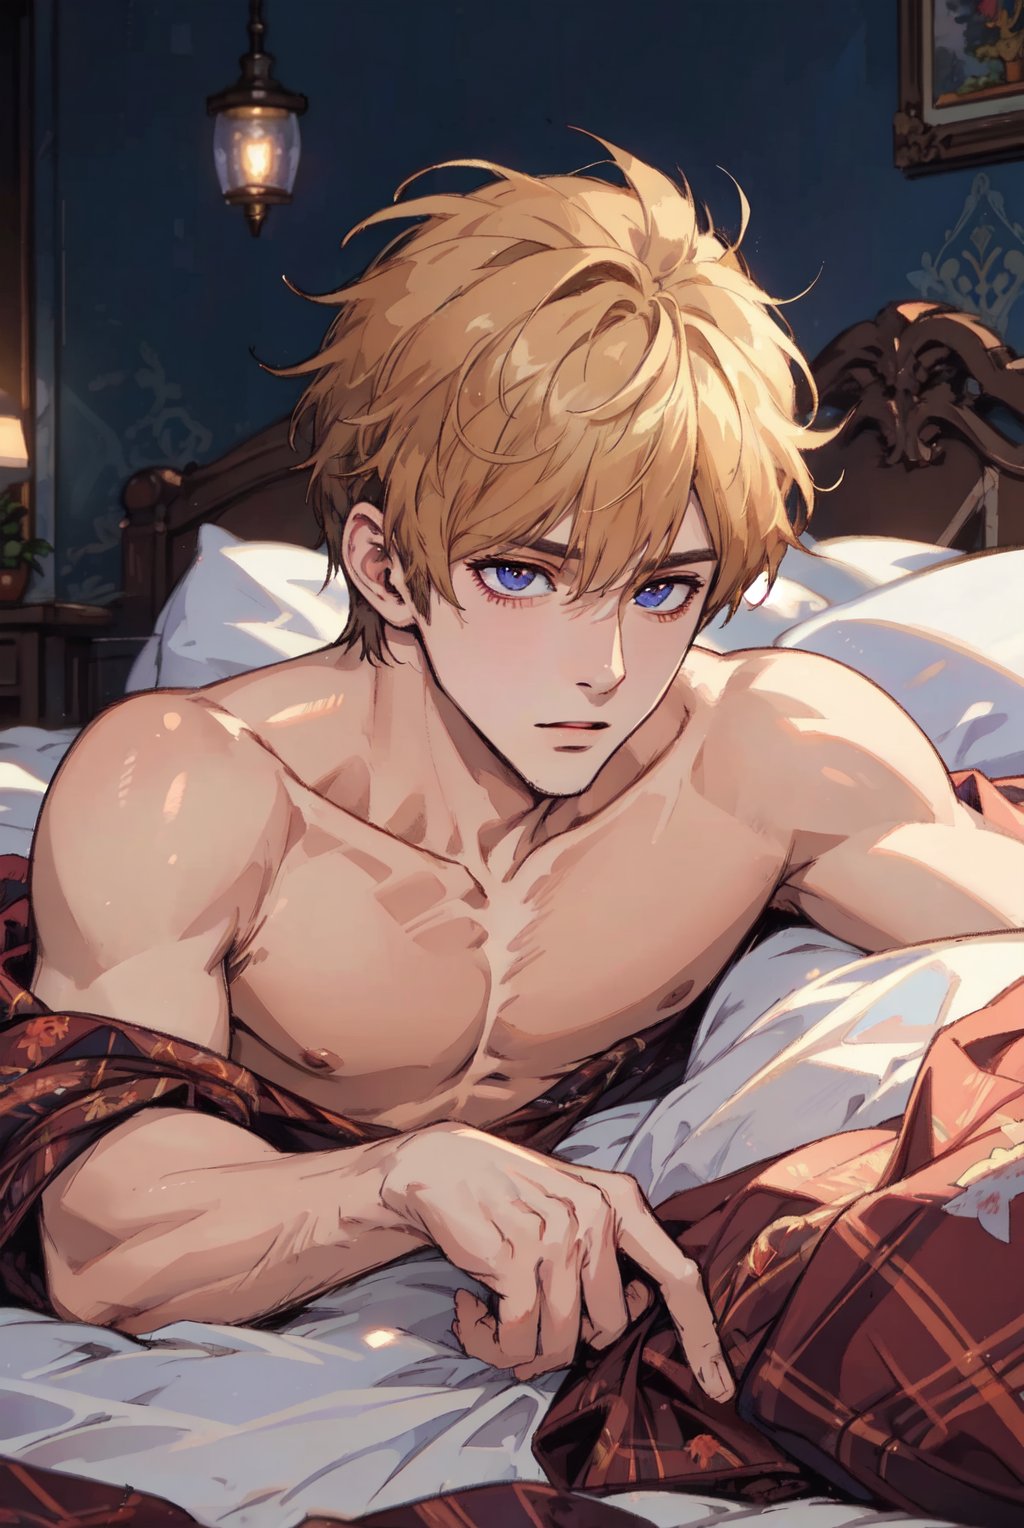 (masterpiece), best quality, high resolution, extremely detailed, detailed background, dynamic lighting, realistic, photorealistic, Prince, one man, just woke up look, handsome, sexy,lying in bed,1boy,1guy